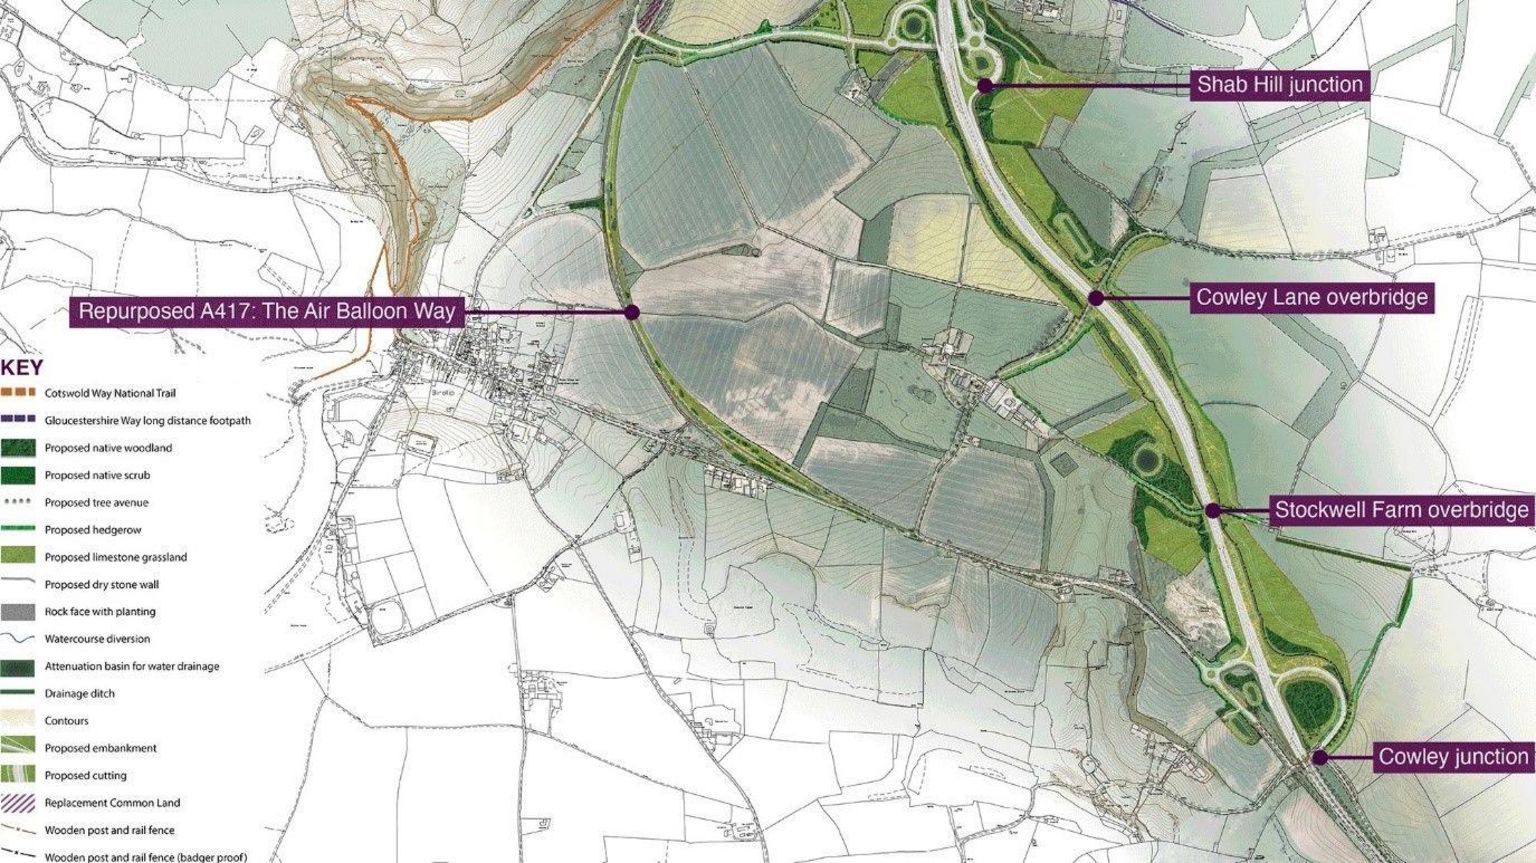 Graphic showing the proposed list of improvements to the A417